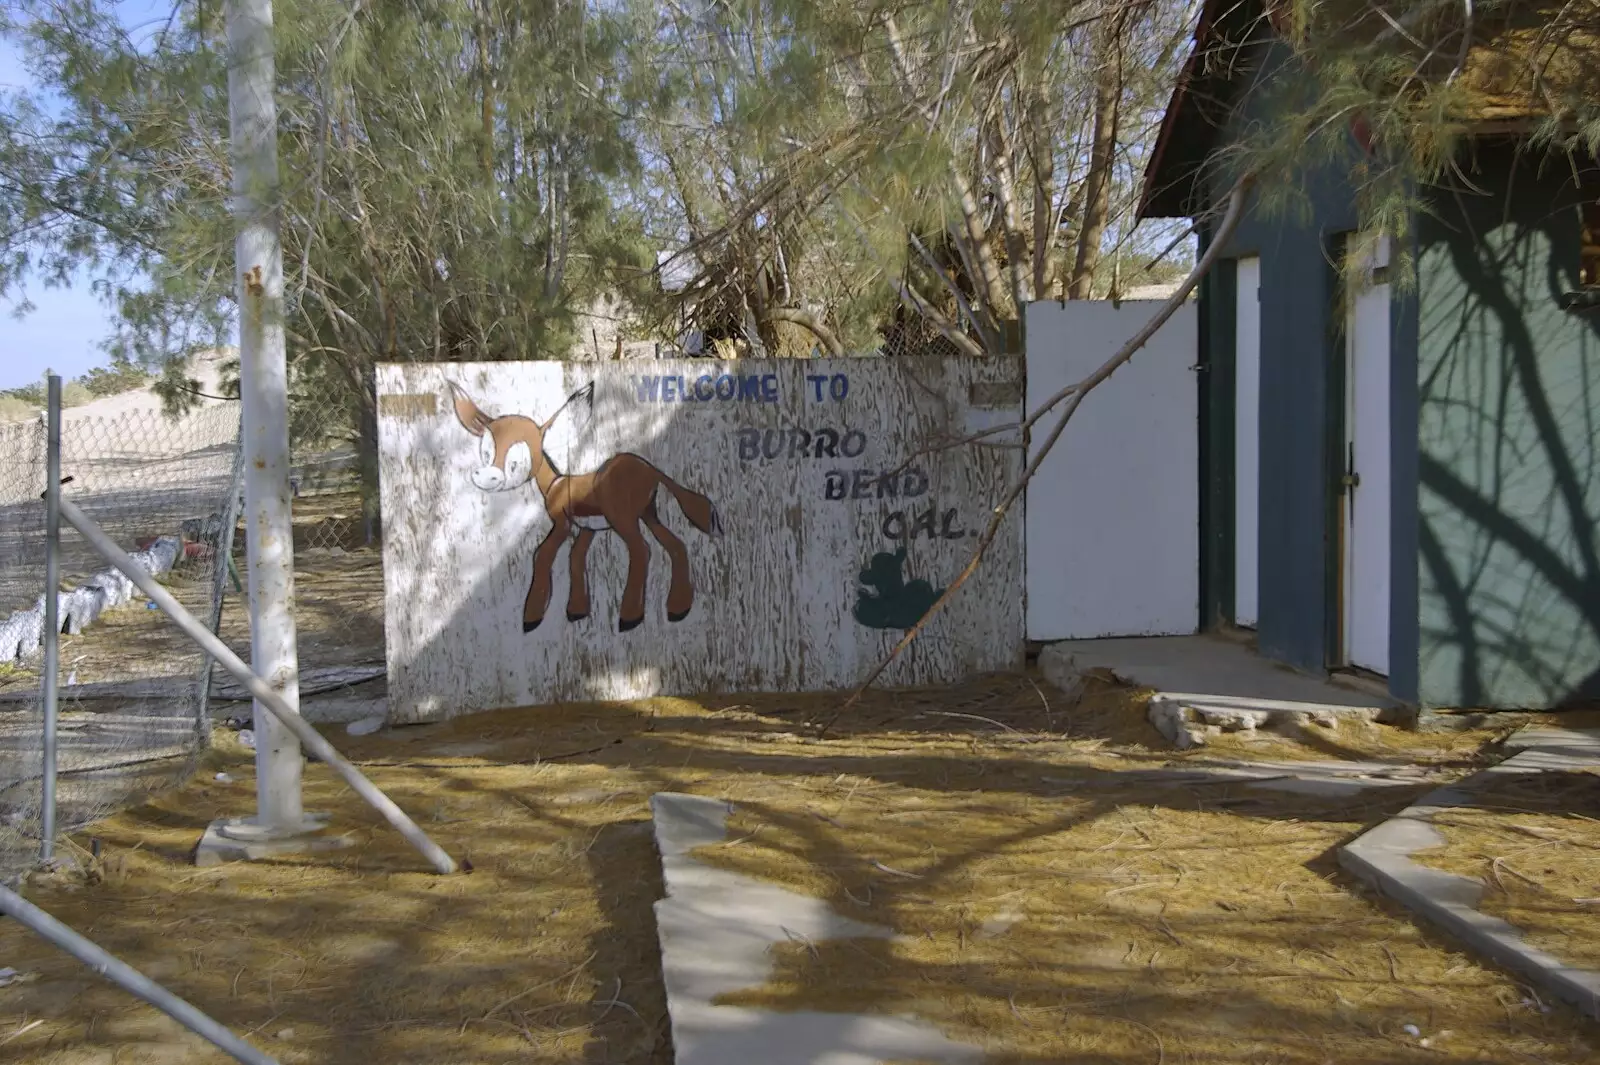 'Welcome to Burro Bend, California', from The End of the World: Julian to the Salton Sea and Back, California, US - 1st March 2008